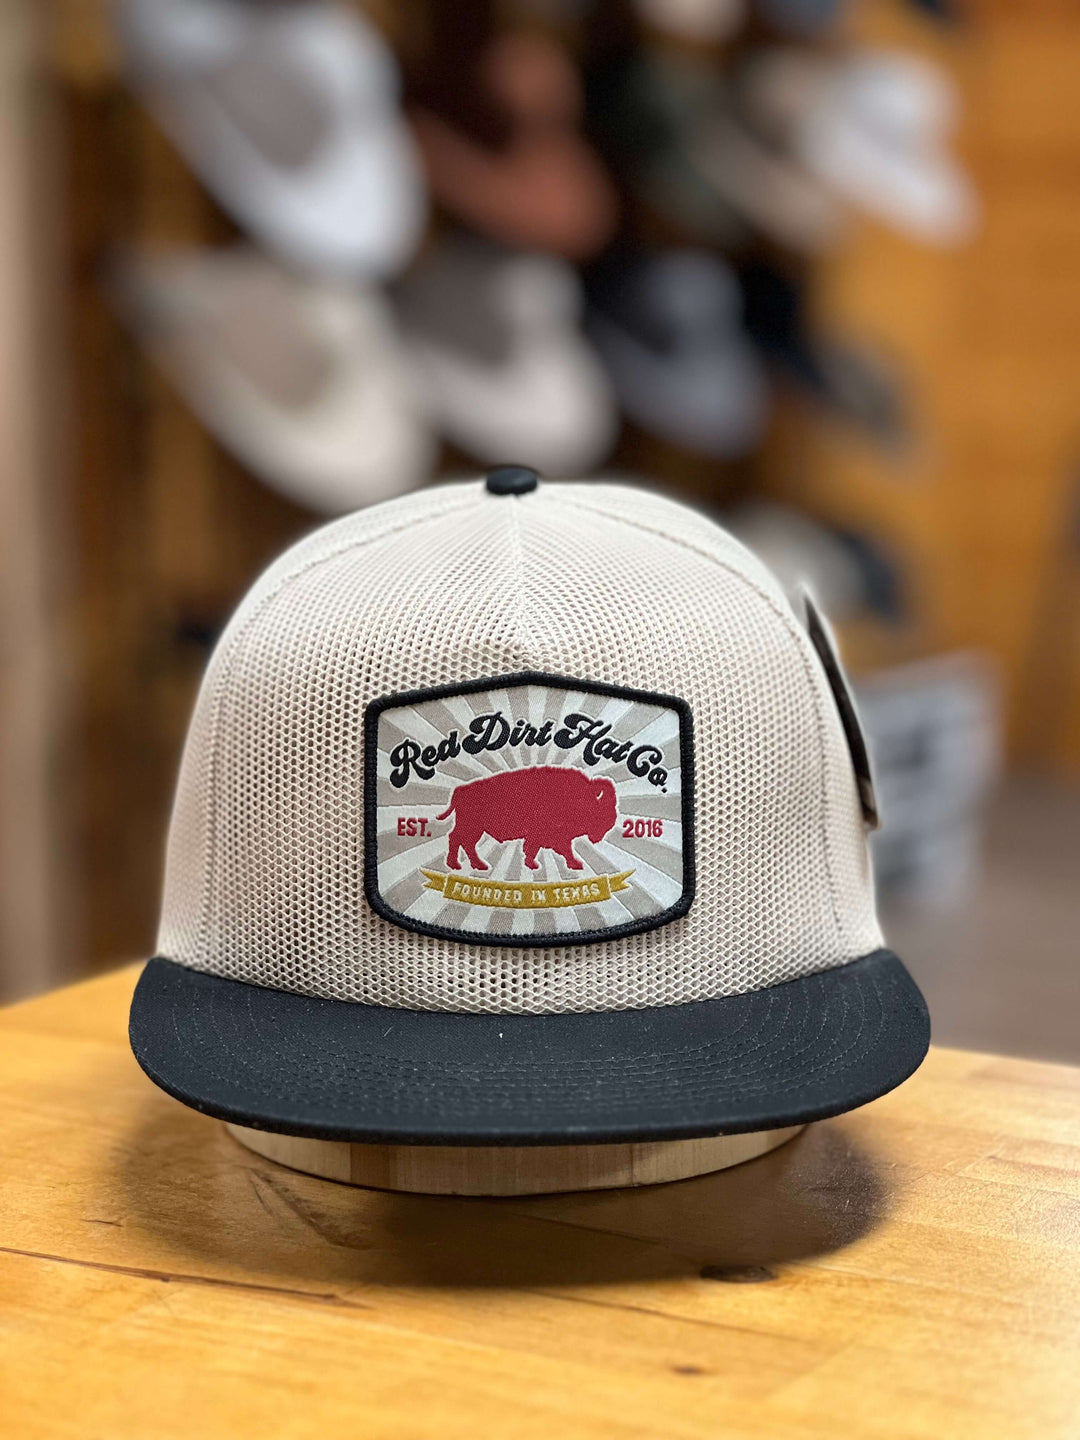 Red Dirt Hat Co. | Founded Tan Cap